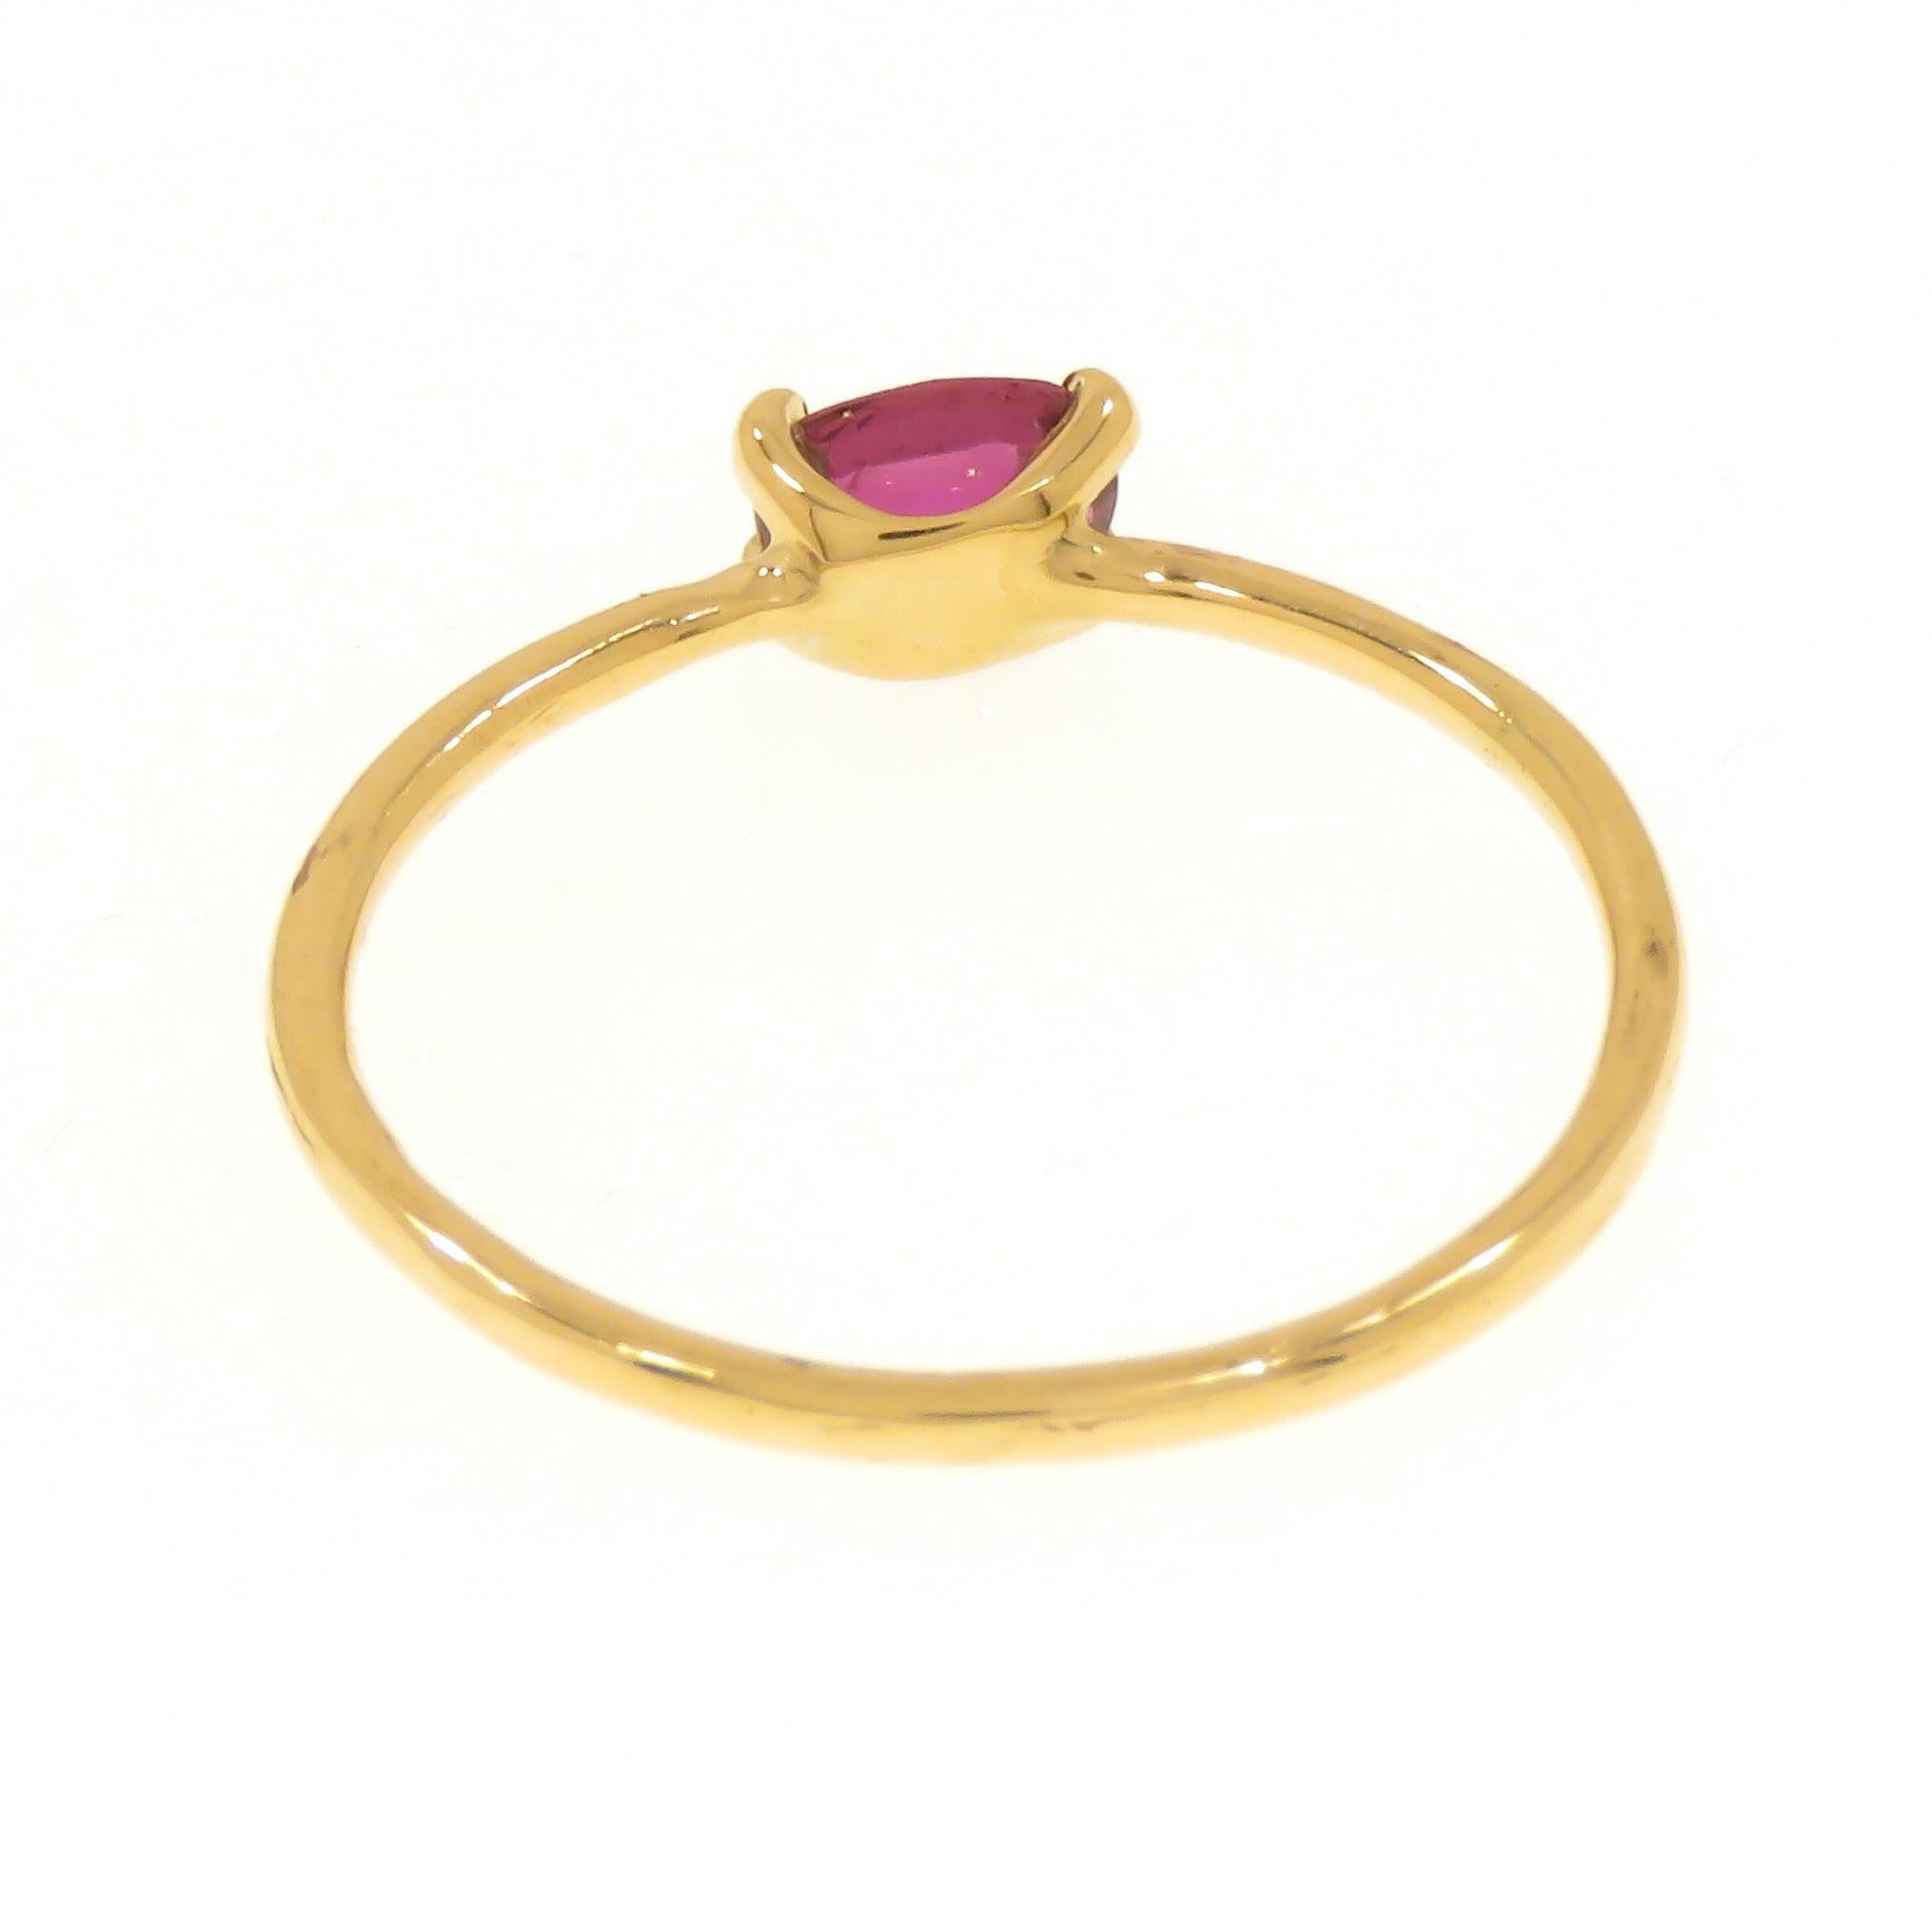 Oval Cut Ruby 9 Karat Rose Gold Band Ring Handcrafted in Italy 4